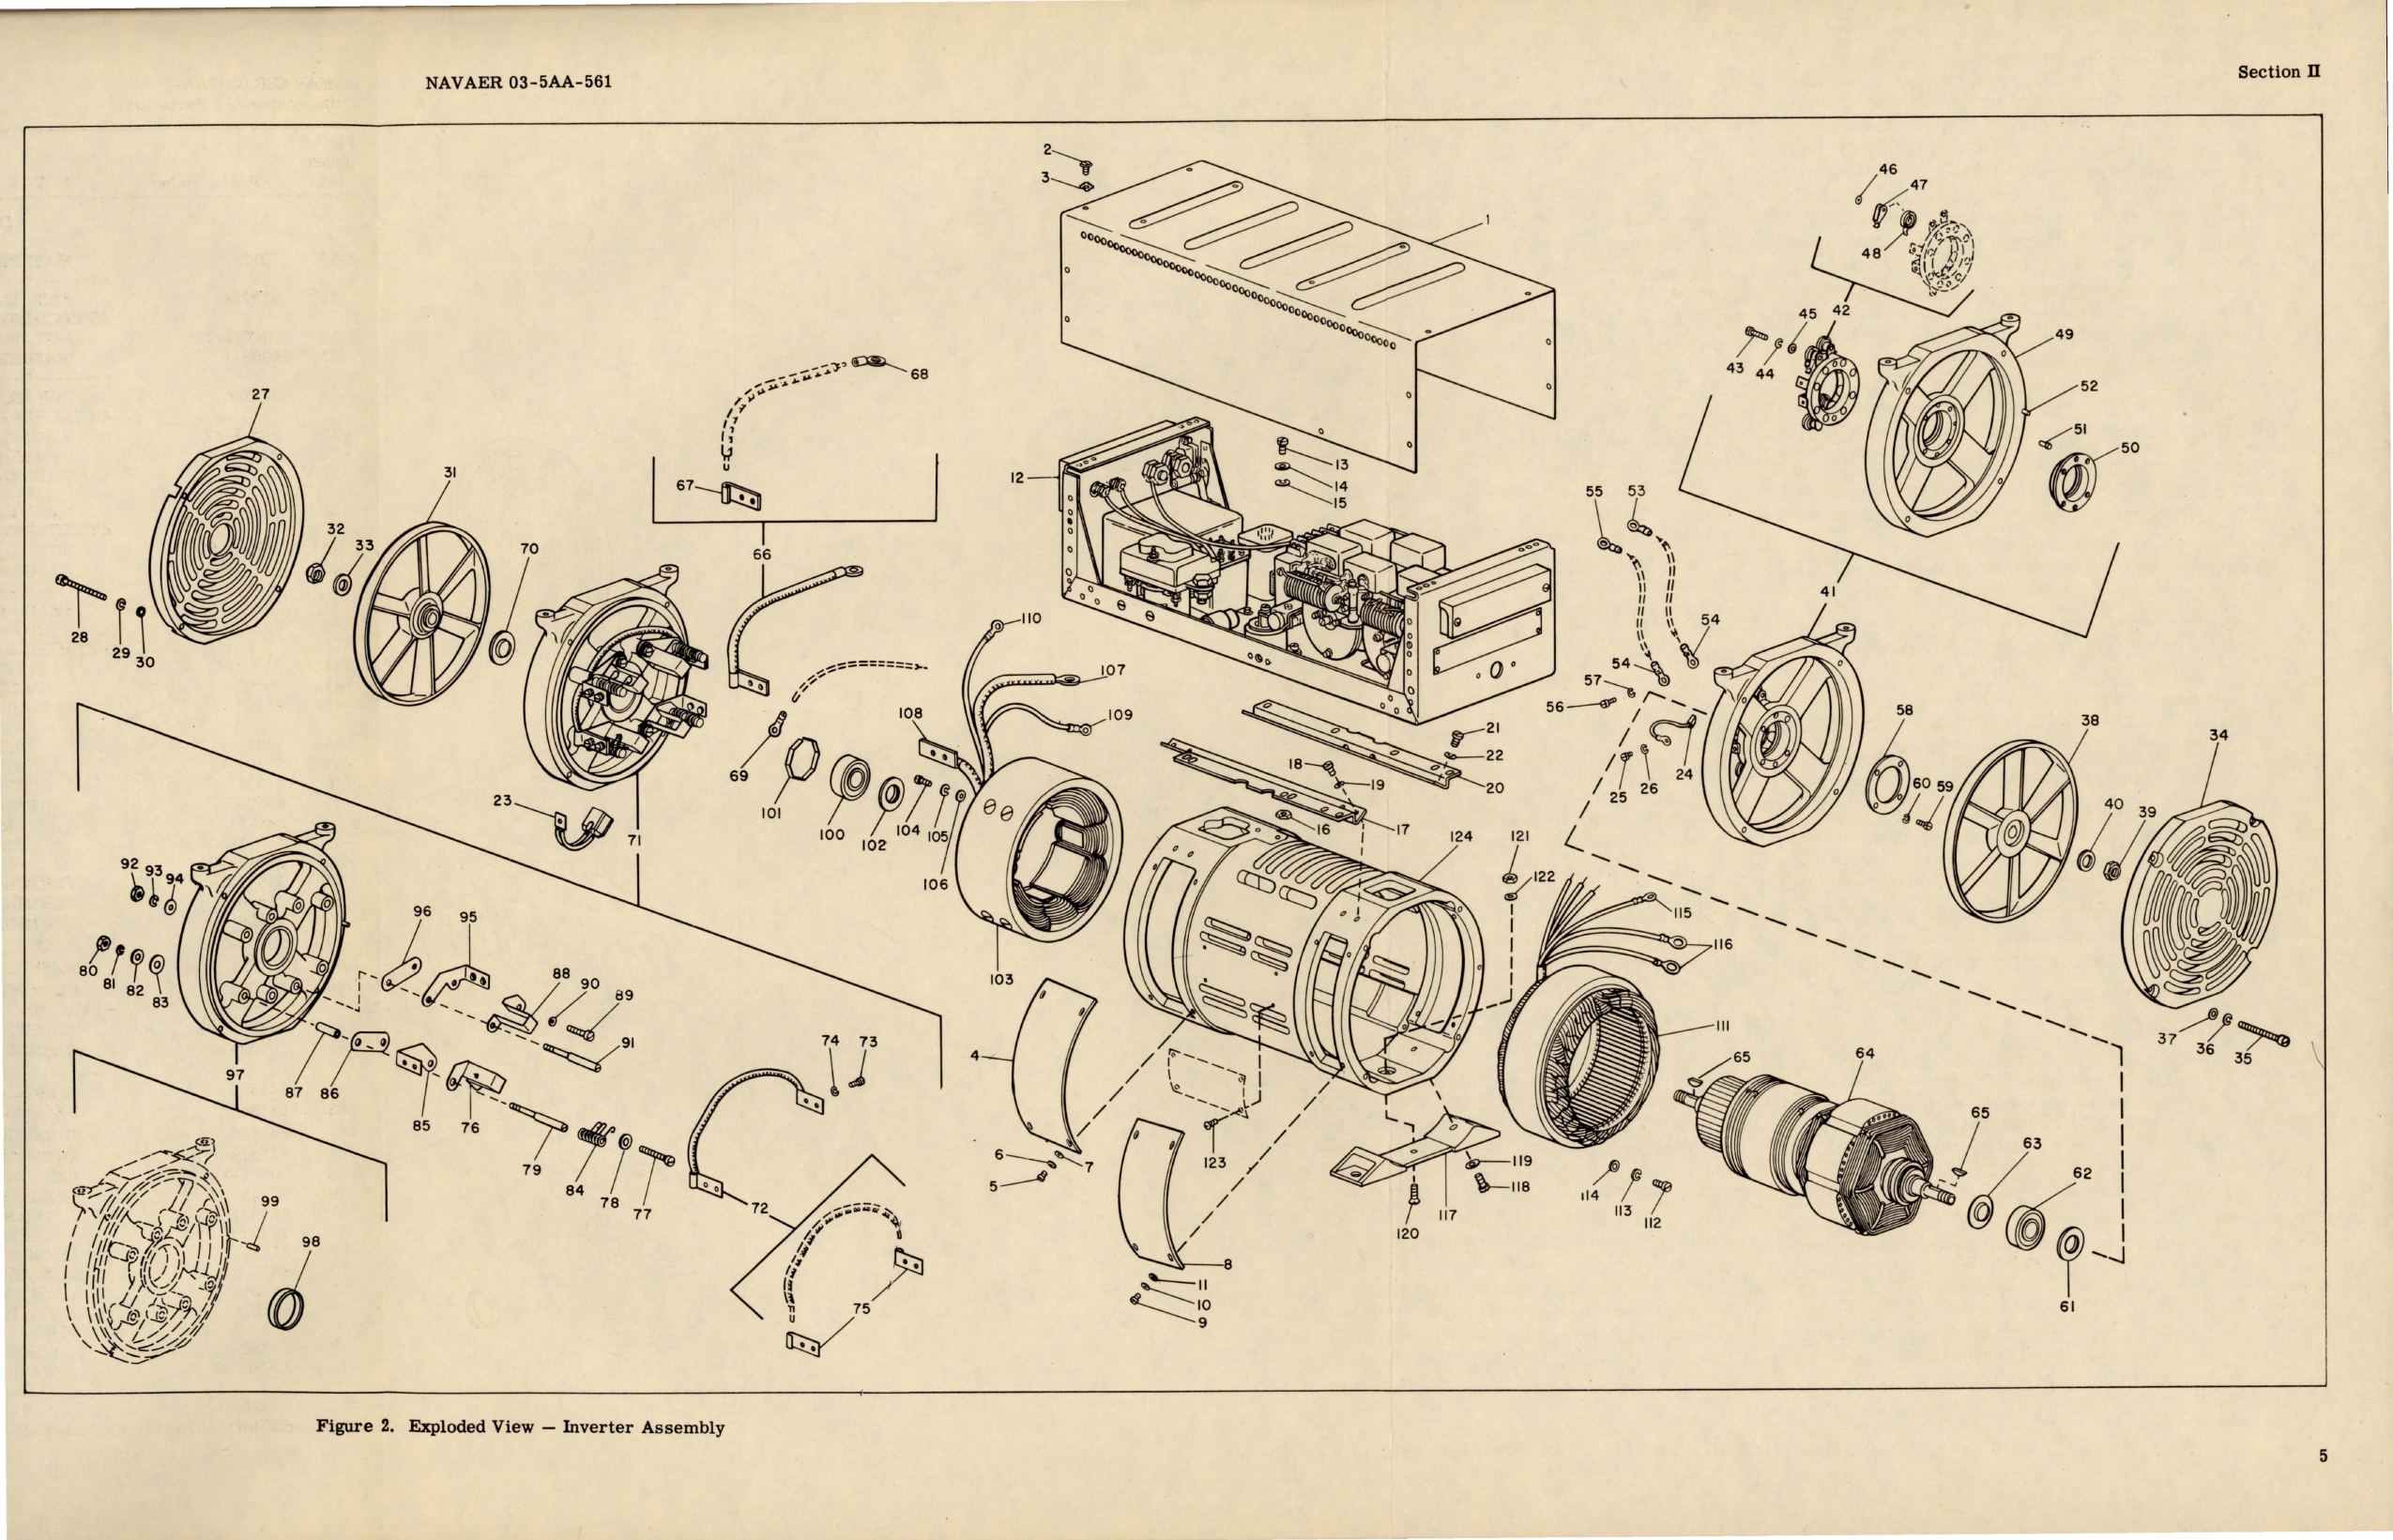 Sample page 9 from AirCorps Library document: Illustrated Parts Breakdown for Inverter - Type 32E06-1-A 